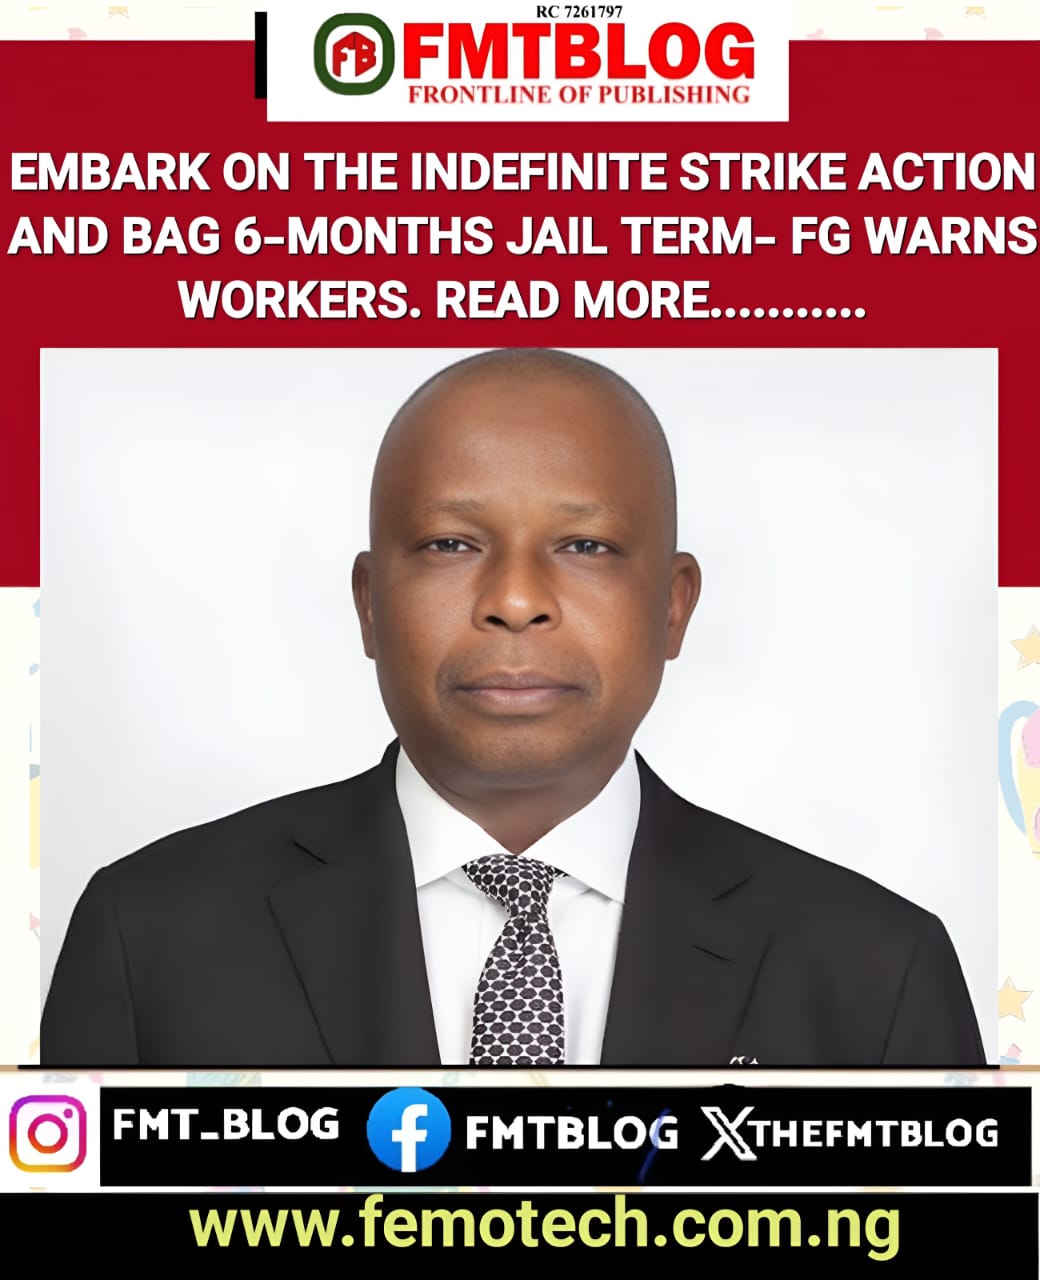 Embark On The Indefinite Strike Action And Bag 6-Months Jail Term- FG Warns Workers.